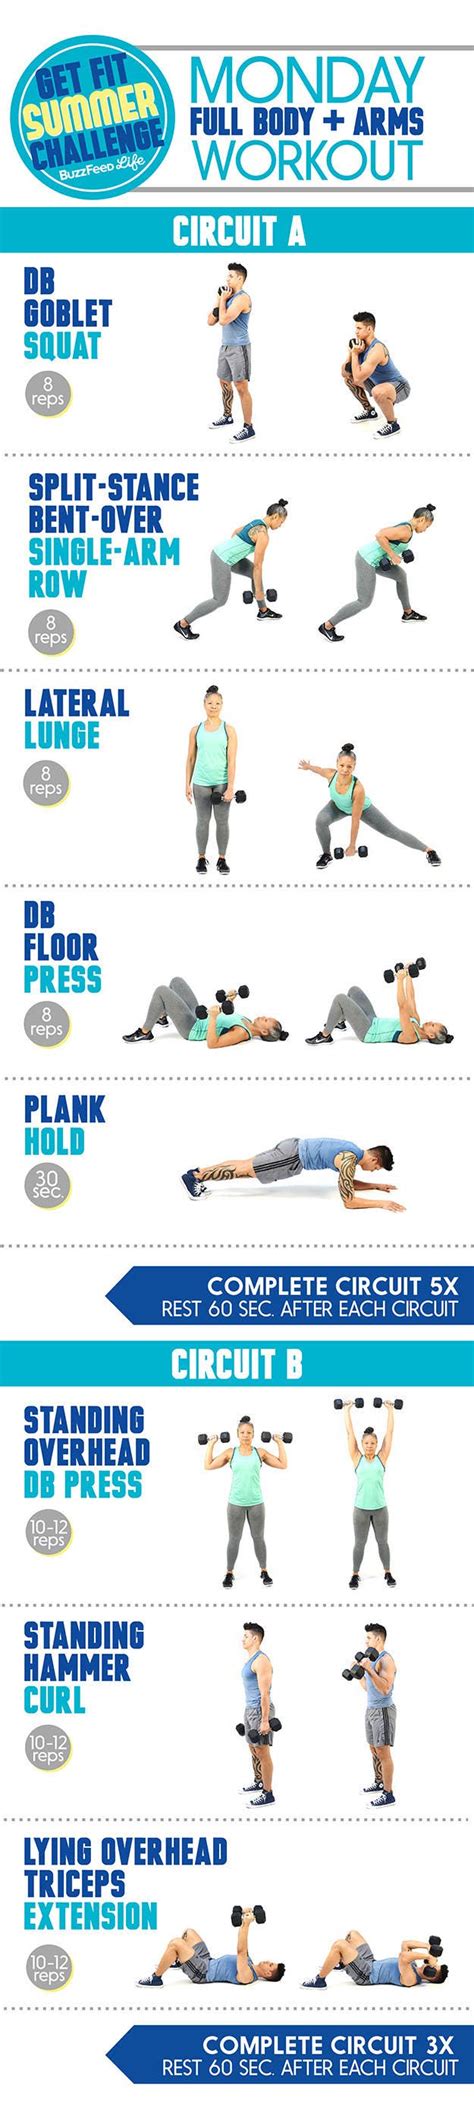 Monday To Friday Workout Plan For Beginners